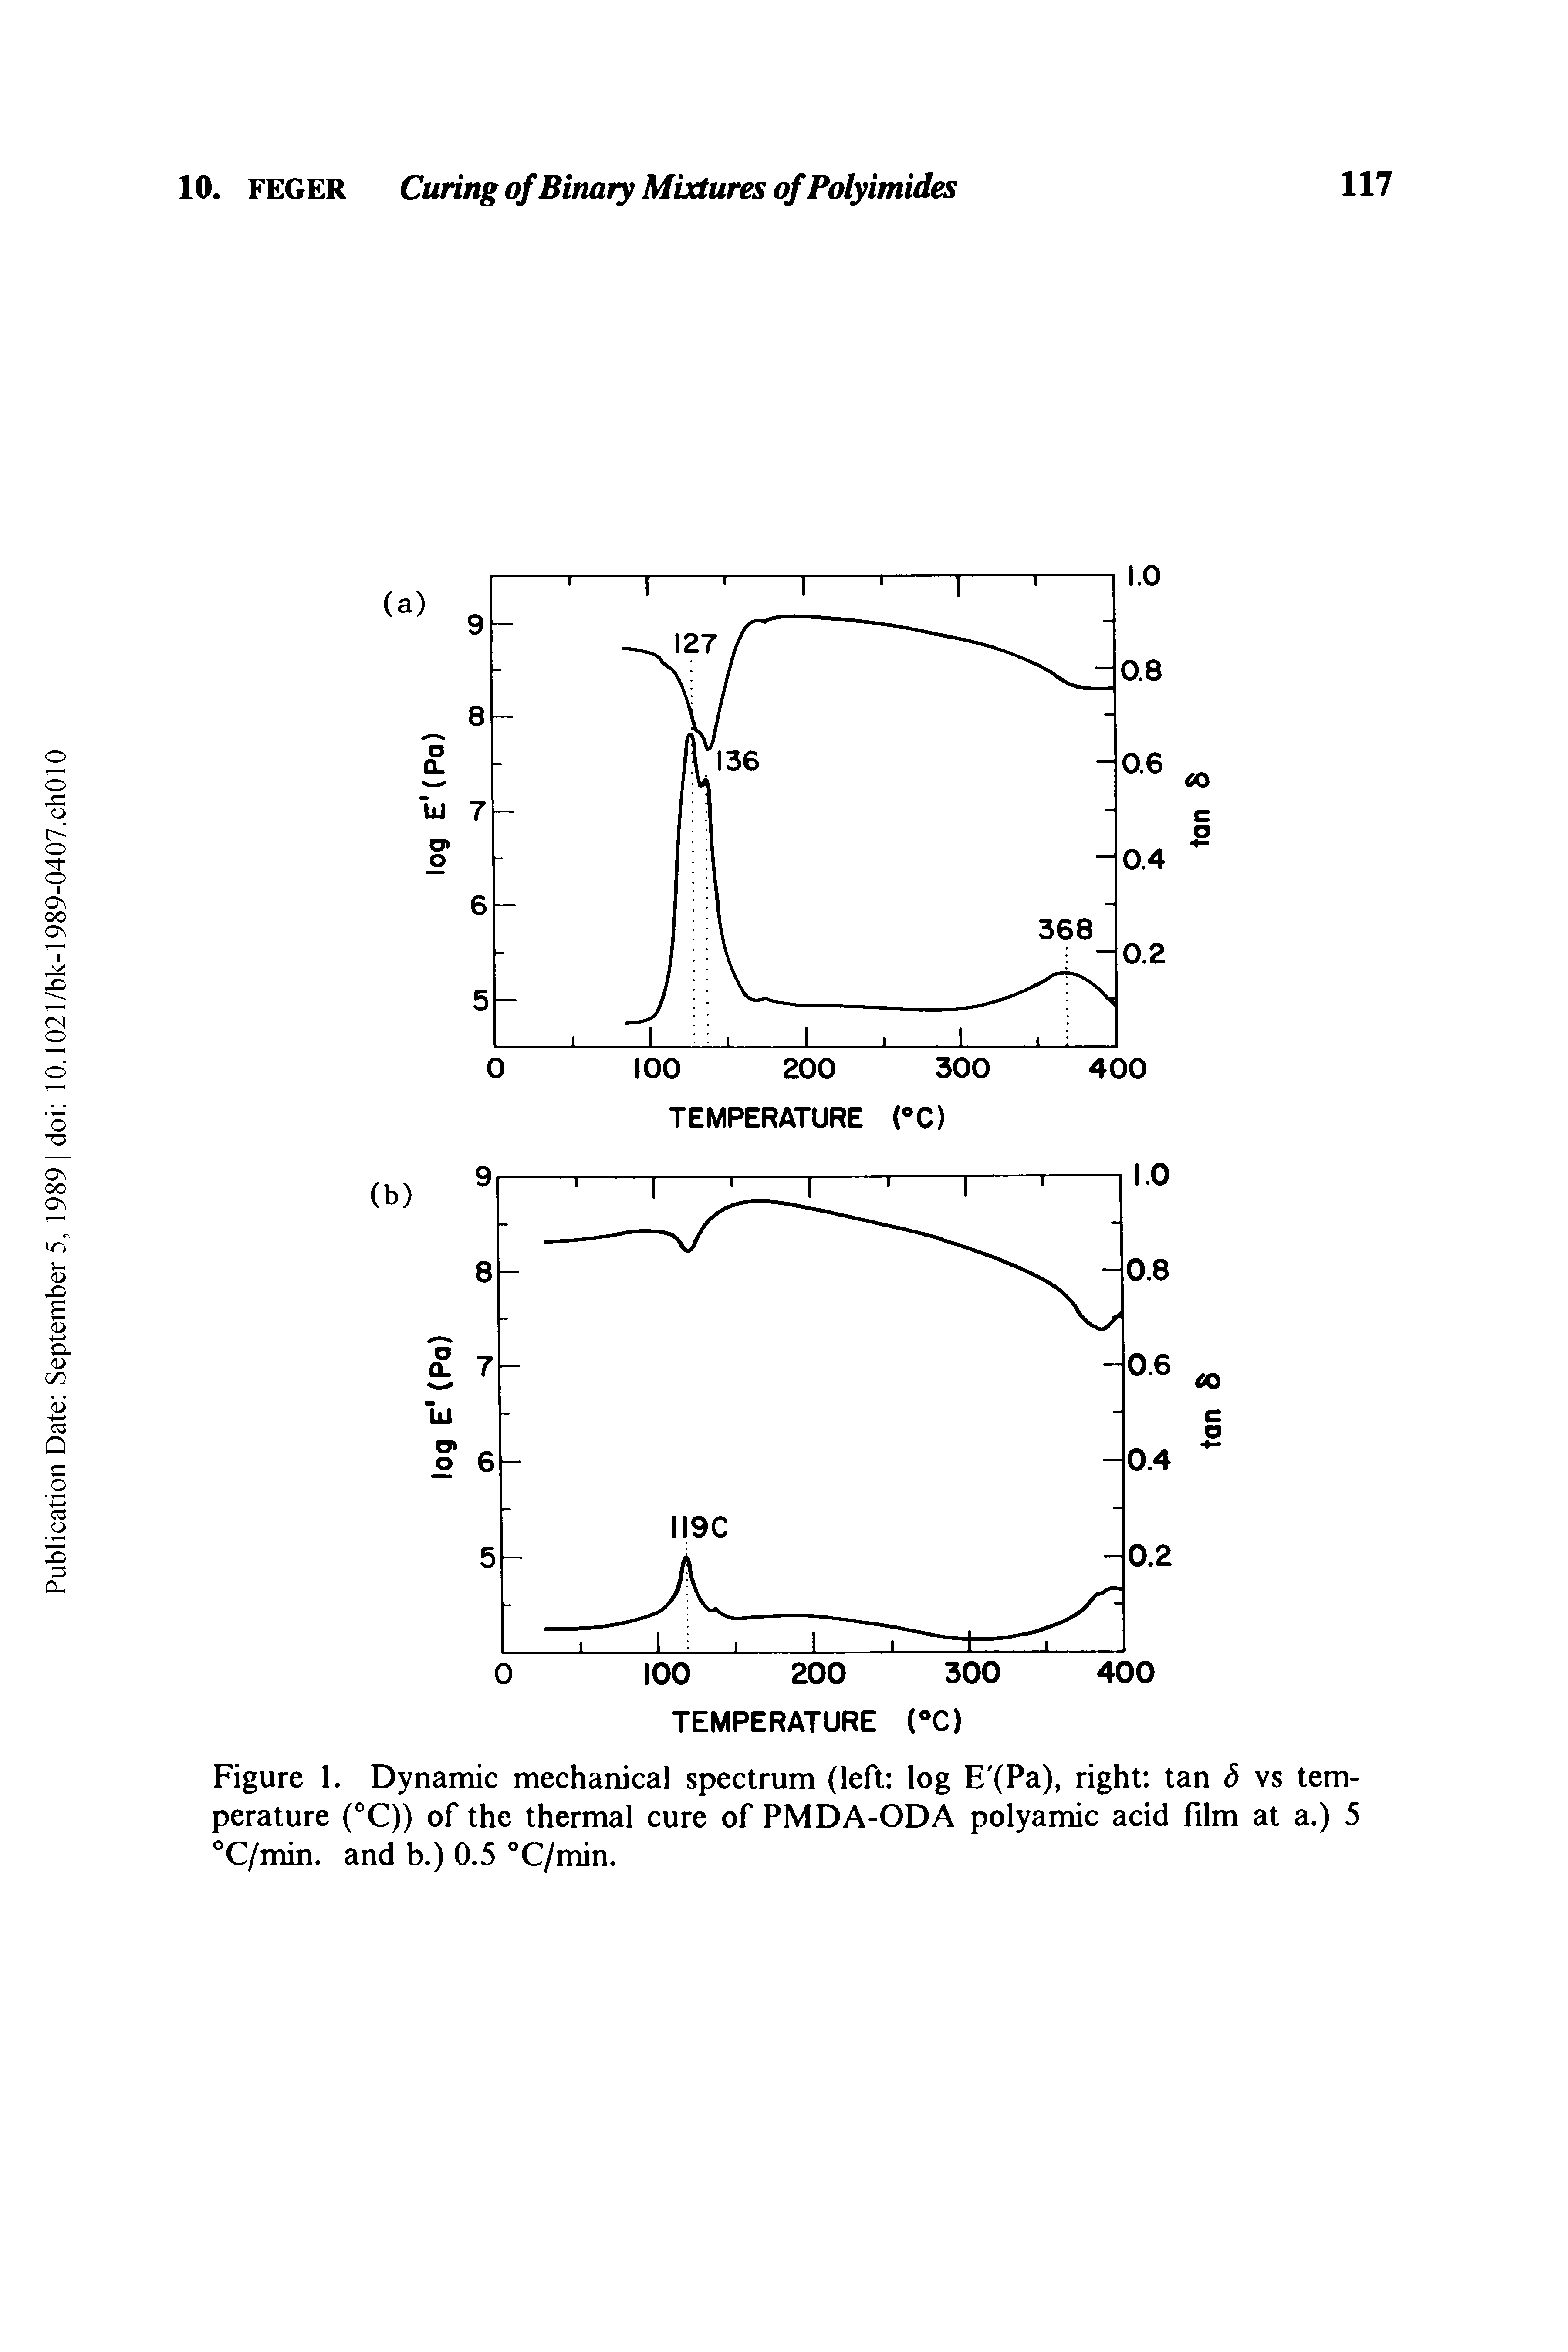 Figure 1. Dynamic mechanical spectrum (left log E (Pa), right tan S vs temperature (°C)) of the thermal cure of PMDA-ODA polyamic acid film at a.) 5 °C/min. and b.) 0.5 °C/min.